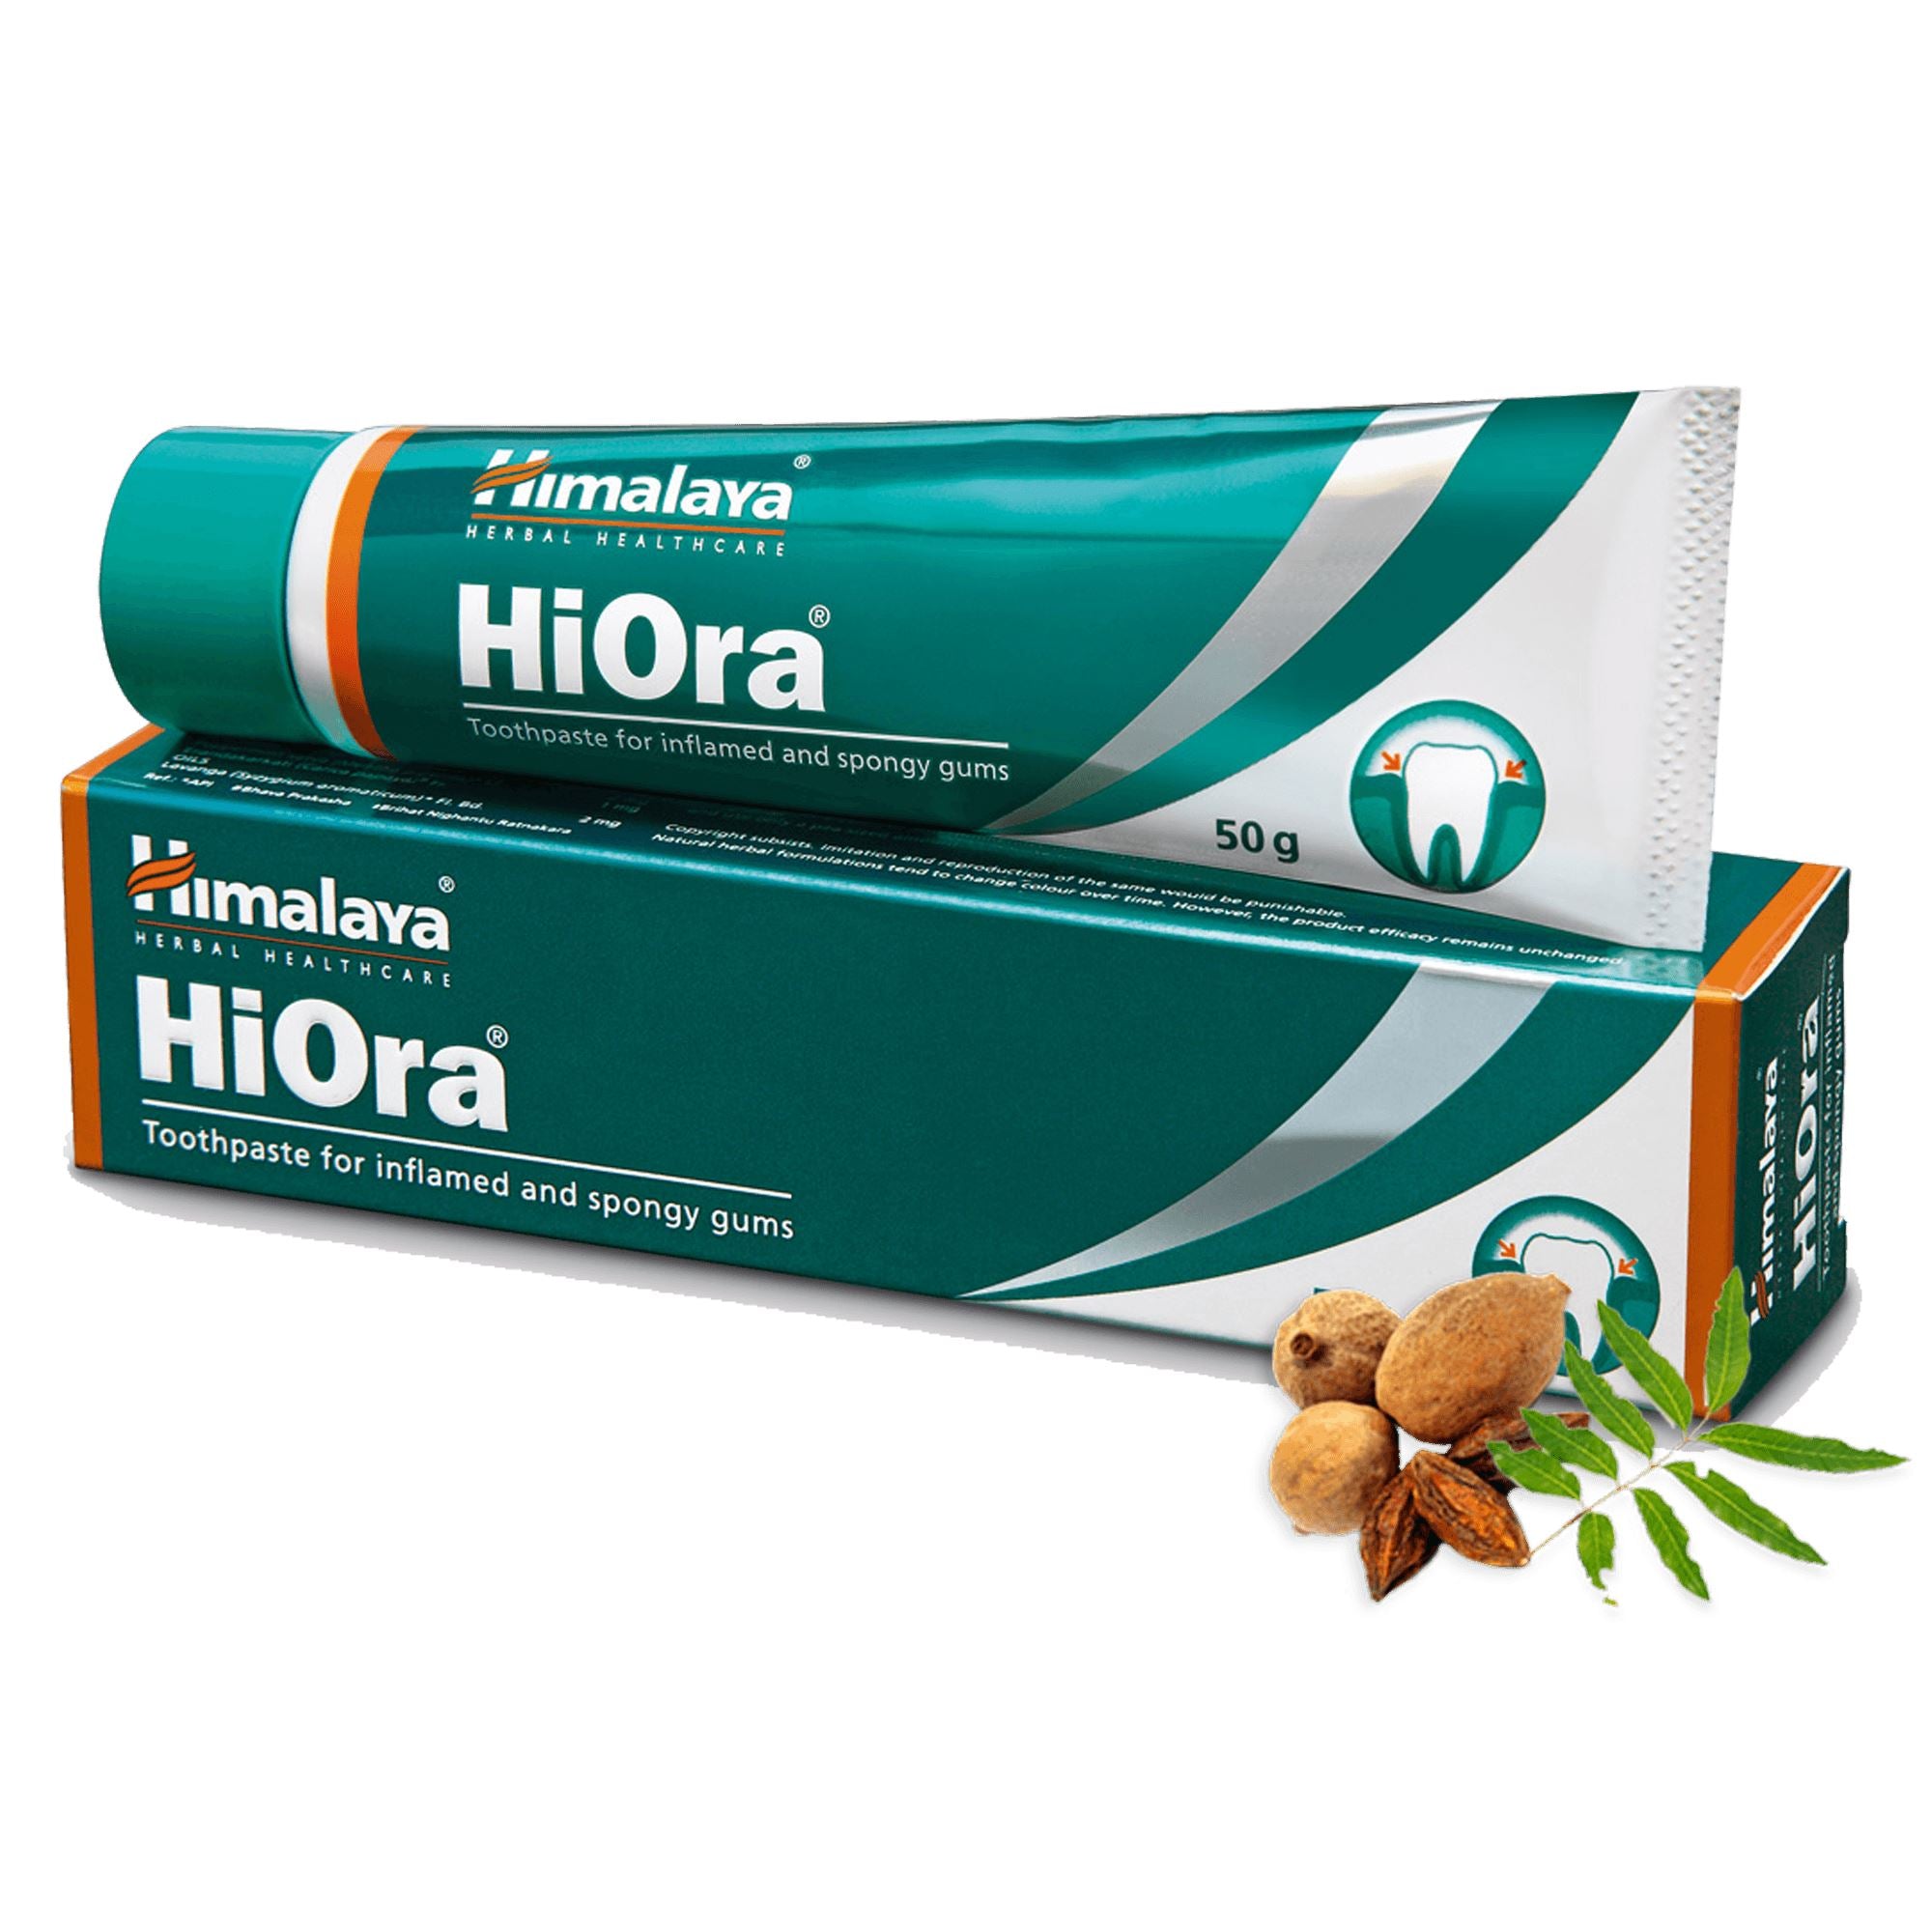 Himalaya HiOra Toothpaste - Toothpaste for inflamed and spongy gums